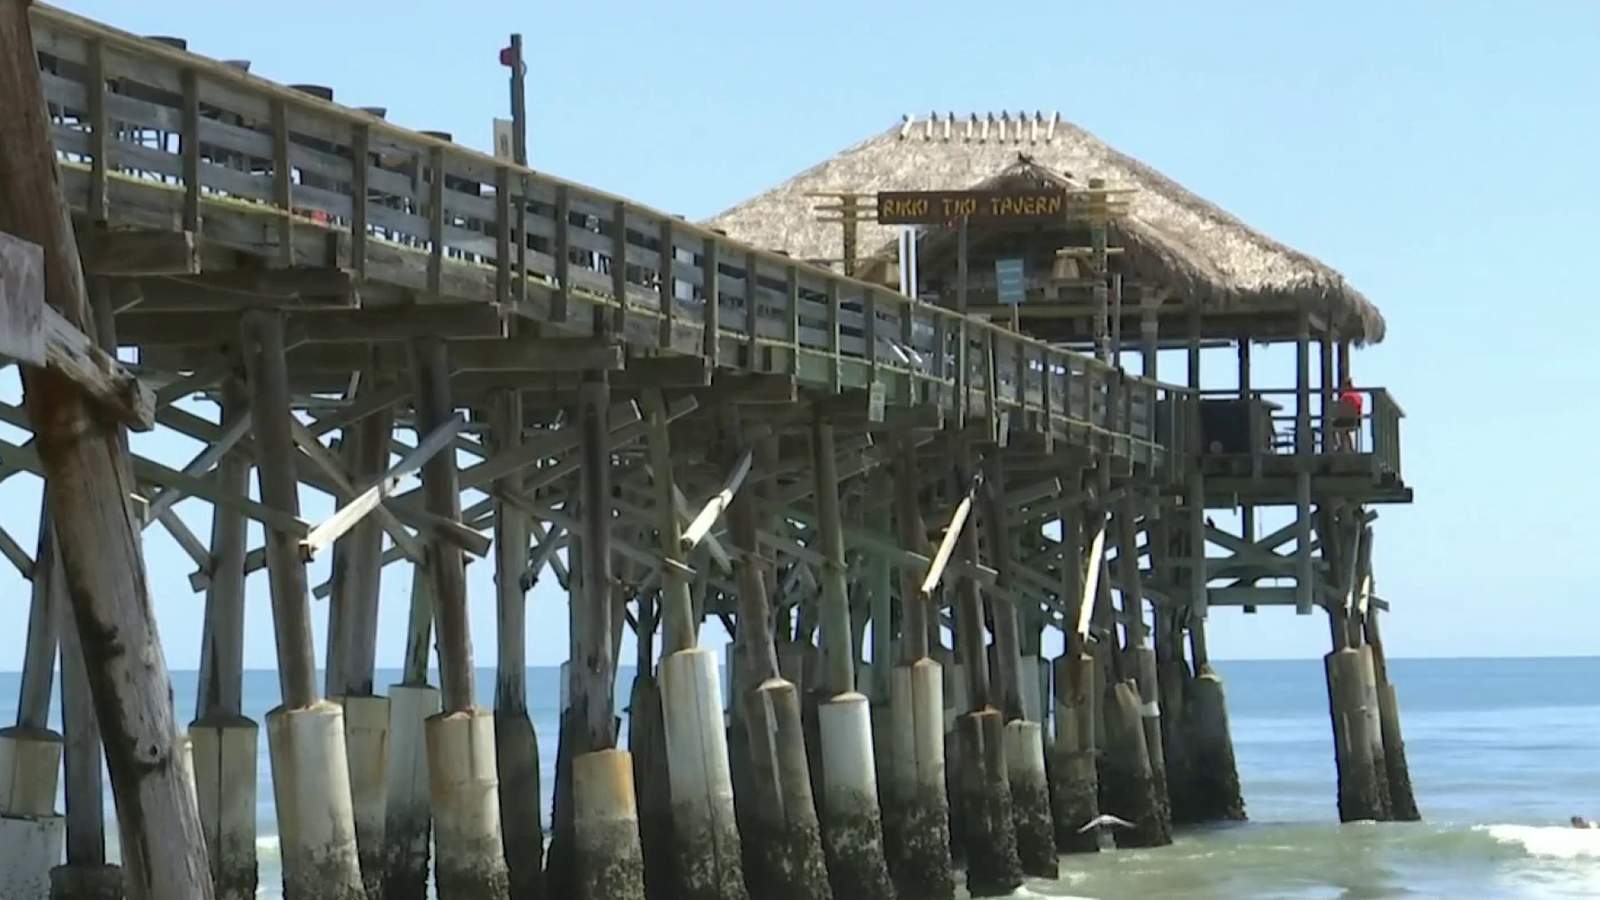 Cocoa Beach Pier now requires all guests to wear face masks as COVID-19 pandemic continues